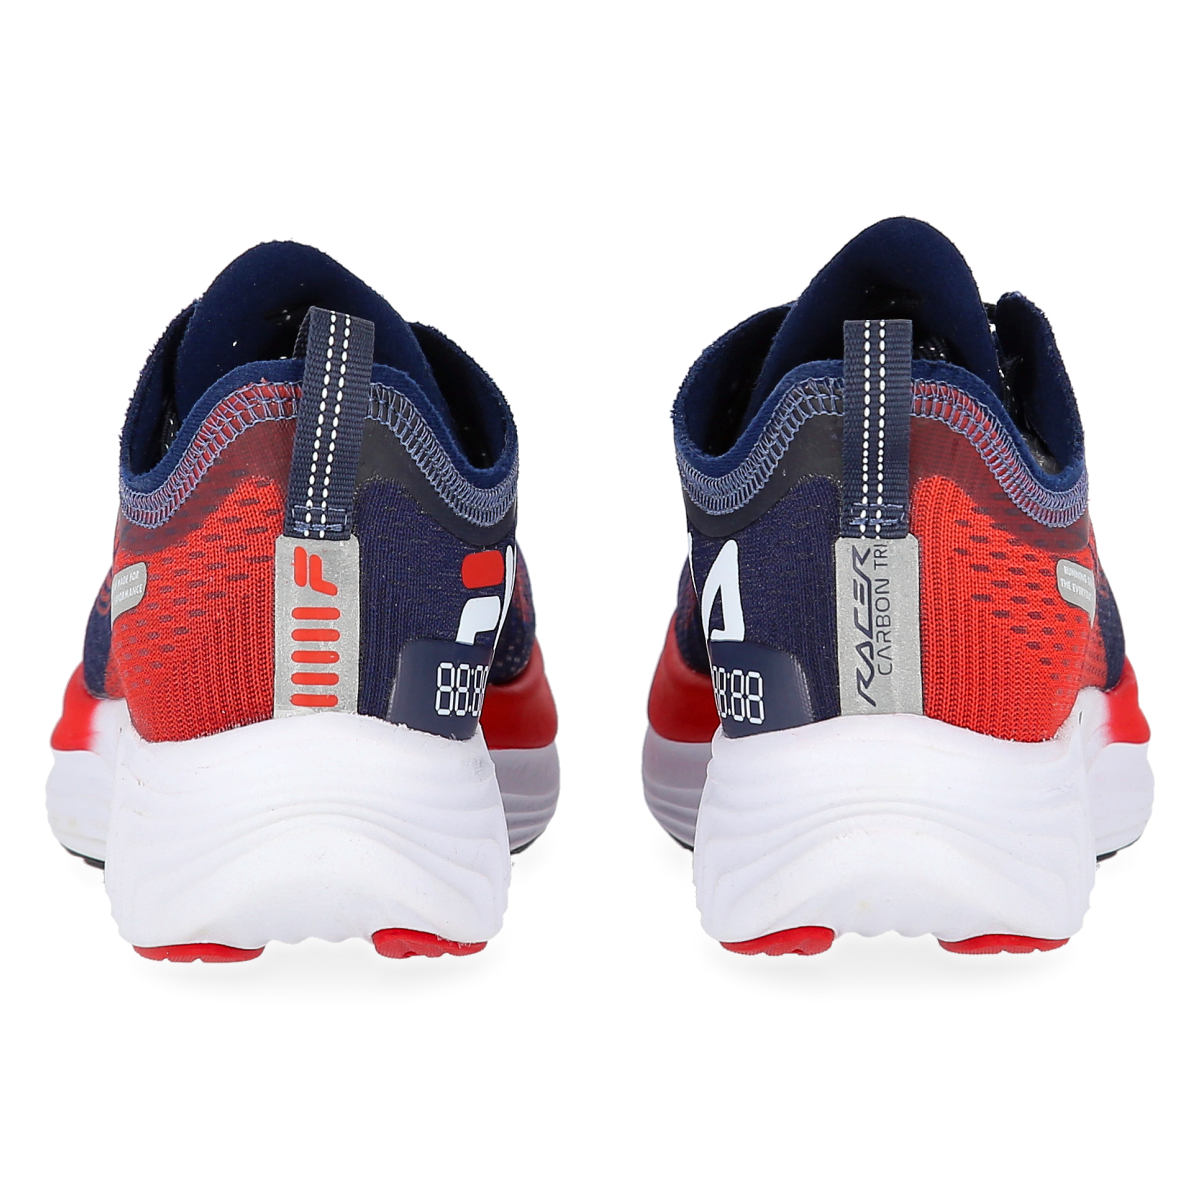 Zapatillas Running Fila Racer Carbon Tri Mujer,  image number null